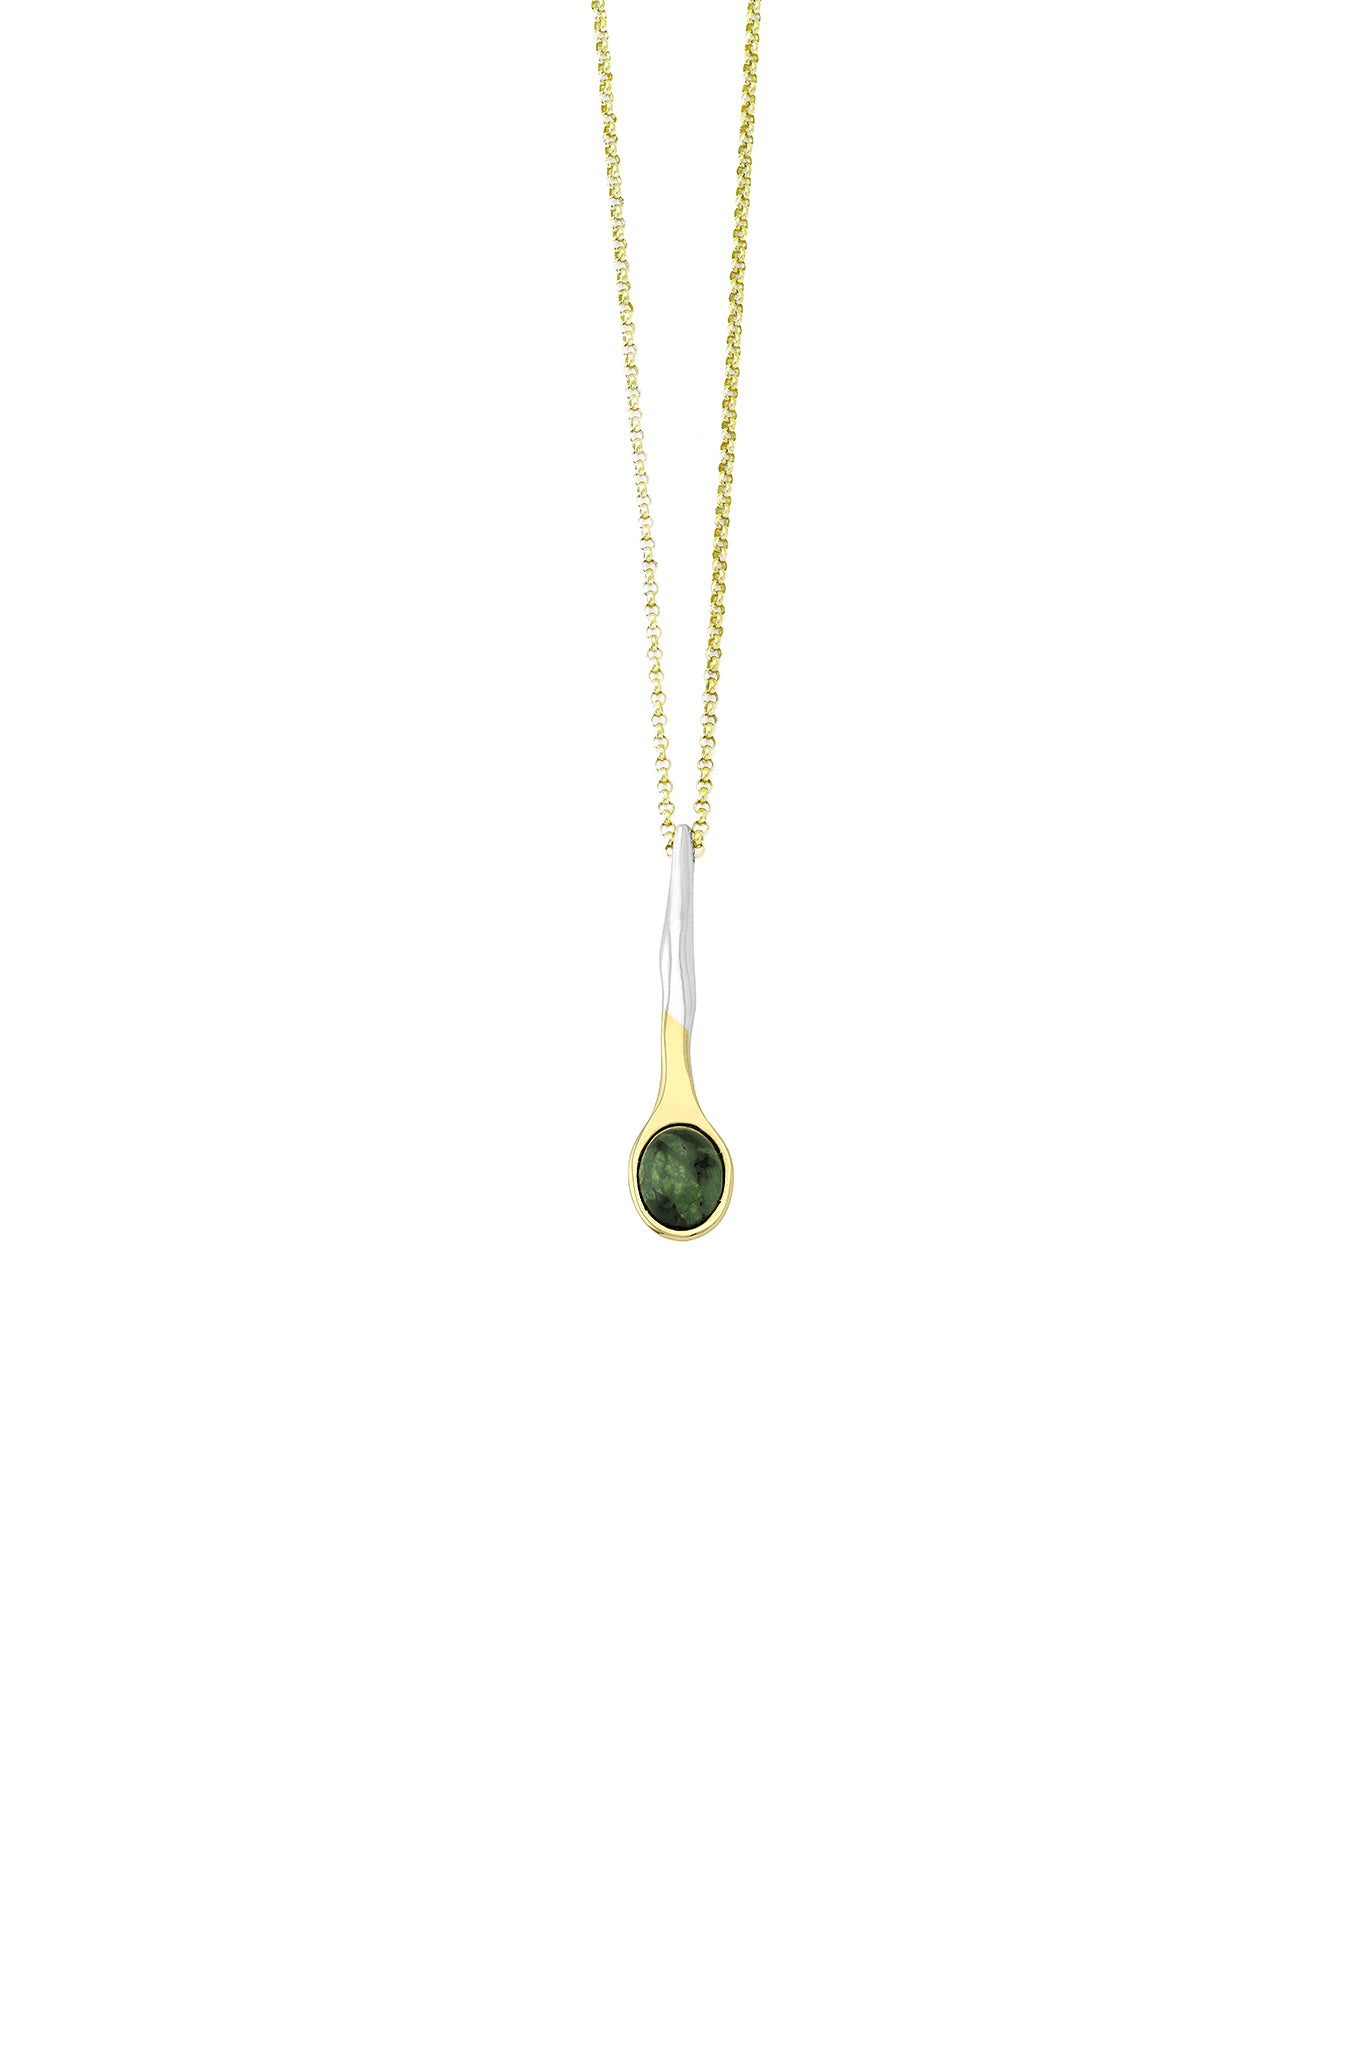 Short Sporos Stone Necklace 18k/925 with 18k chain